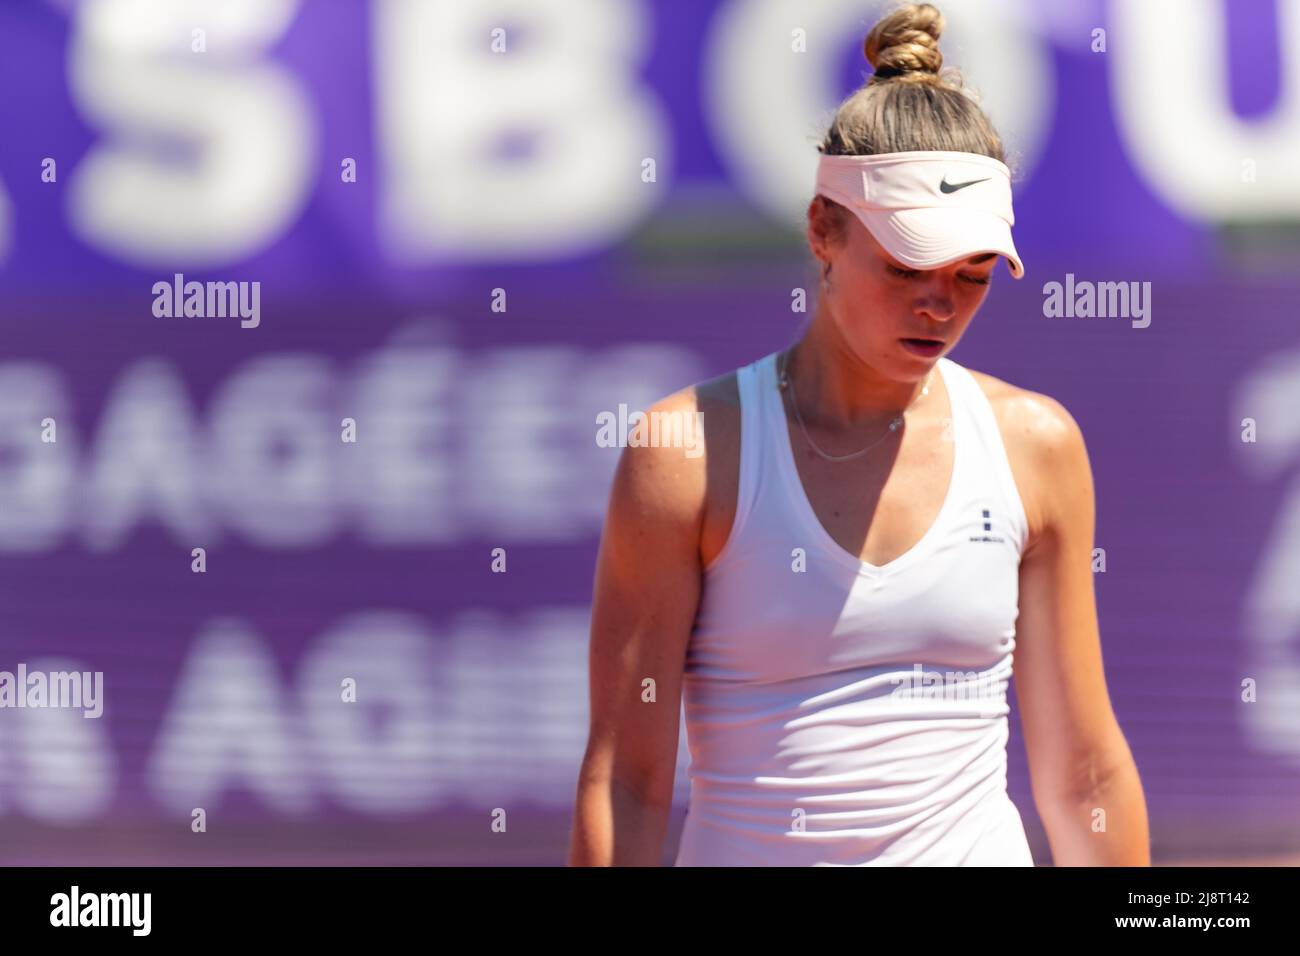 Strasbourg, France. 18th May, 2022. Ekaterina Makarova in action during her Round of 16 Singles match of the 2022 Internationaux de Strasbourg against Oceane Dodin of France at the Tennis Club de Strasbourg in Strasbourg, France Dan O' Connor/SPP Credit: SPP Sport Press Photo. /Alamy Live News Stock Photo